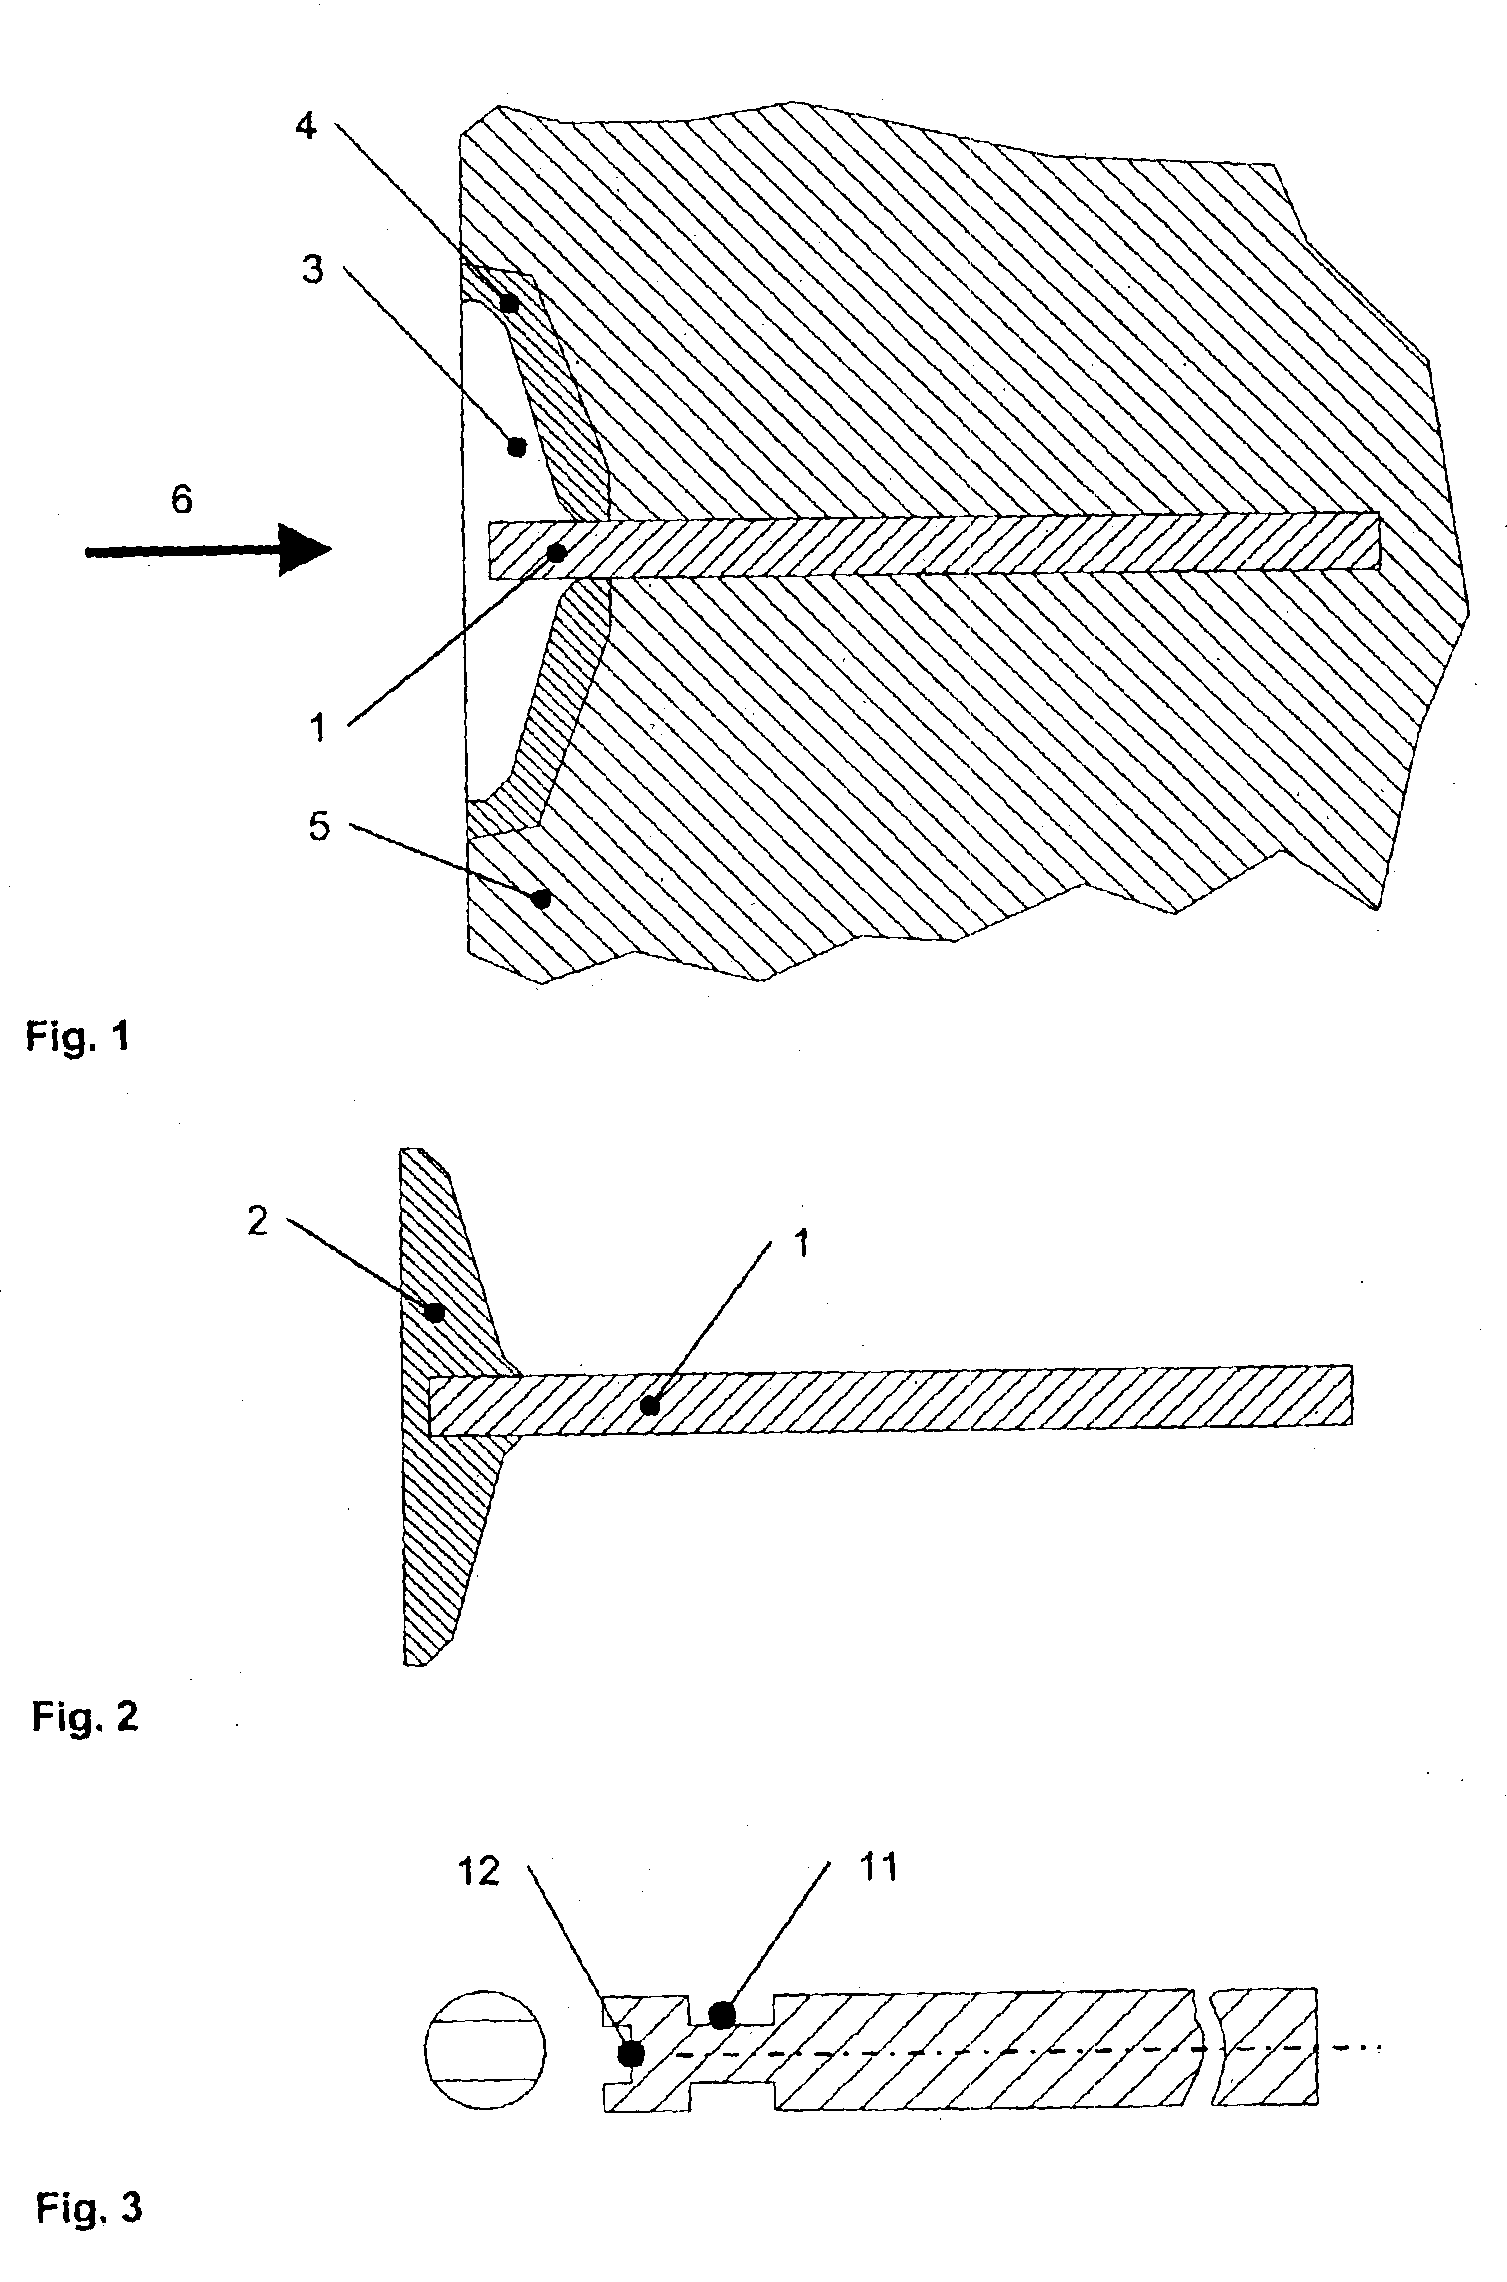 Method for manufacturing a multi-part valve for internal combustion engines